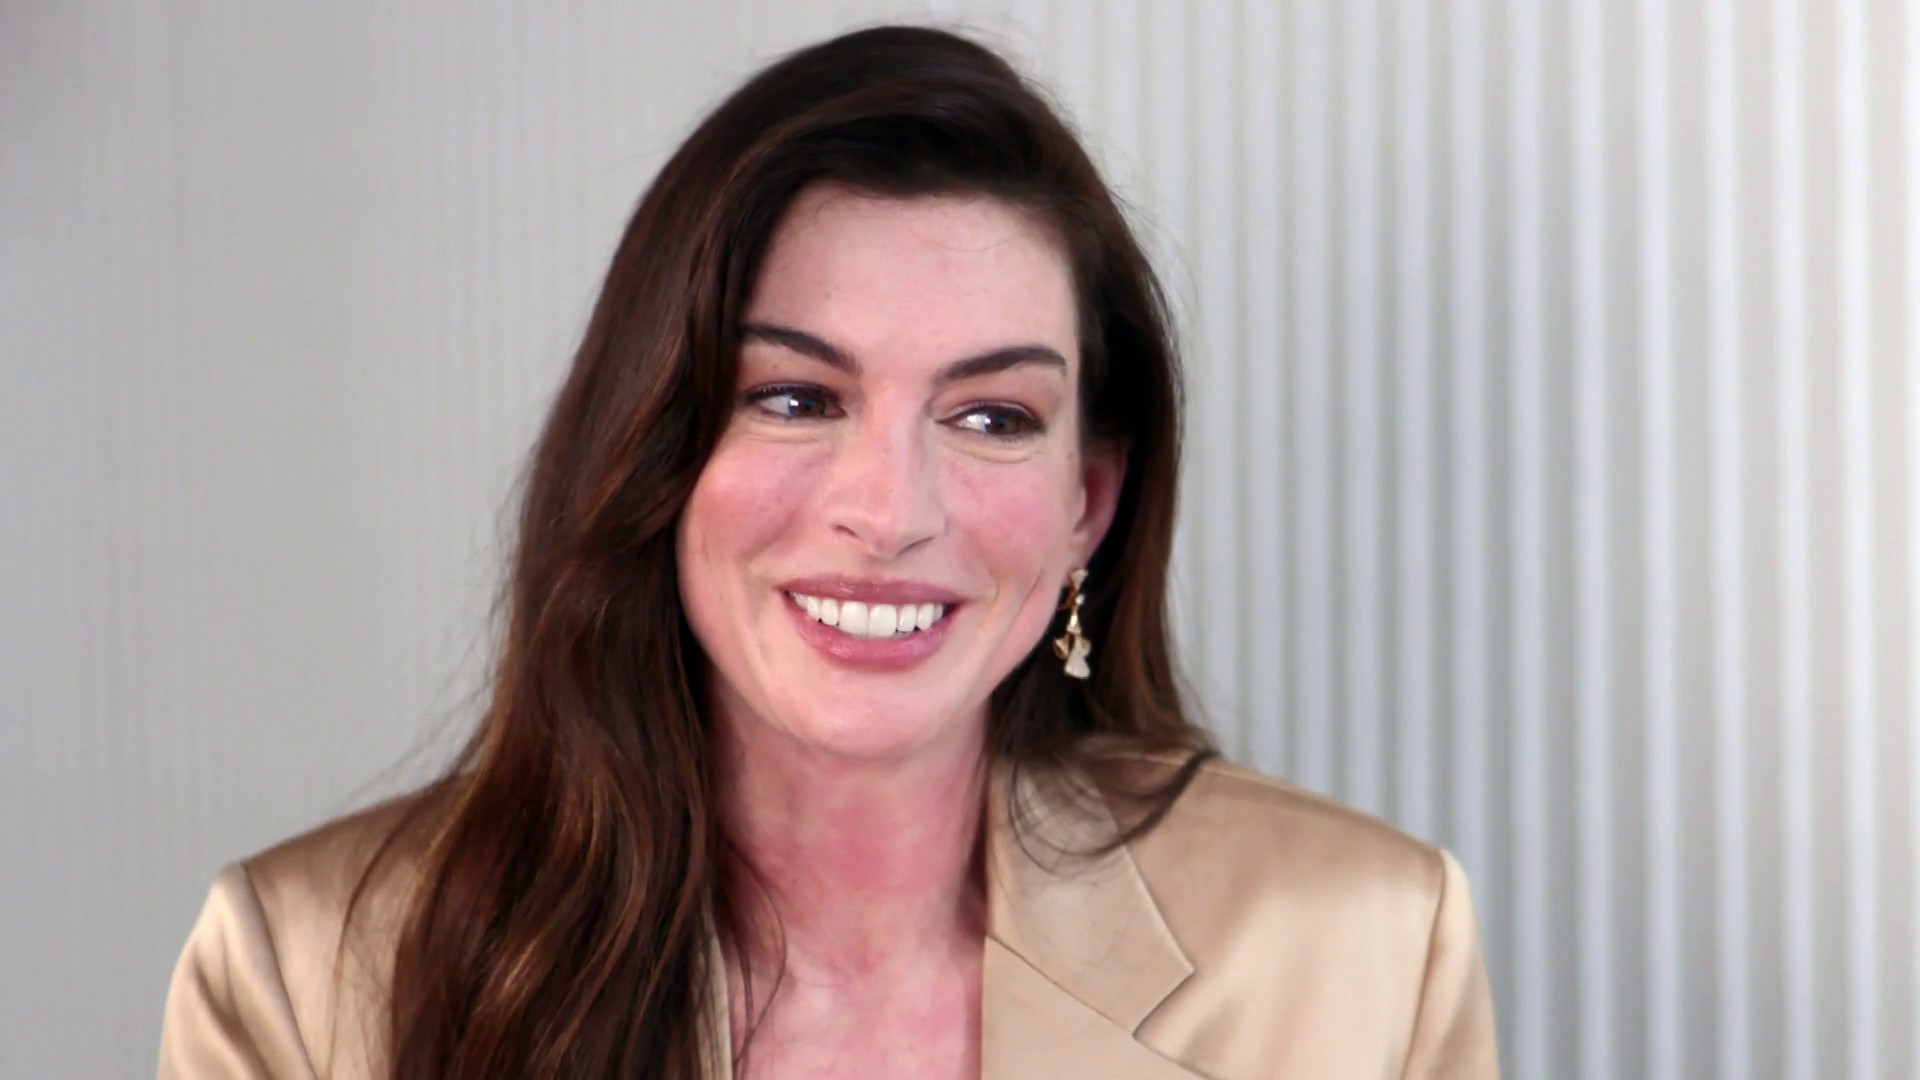 Anne Hathaway shares refreshing take on aging and beauty